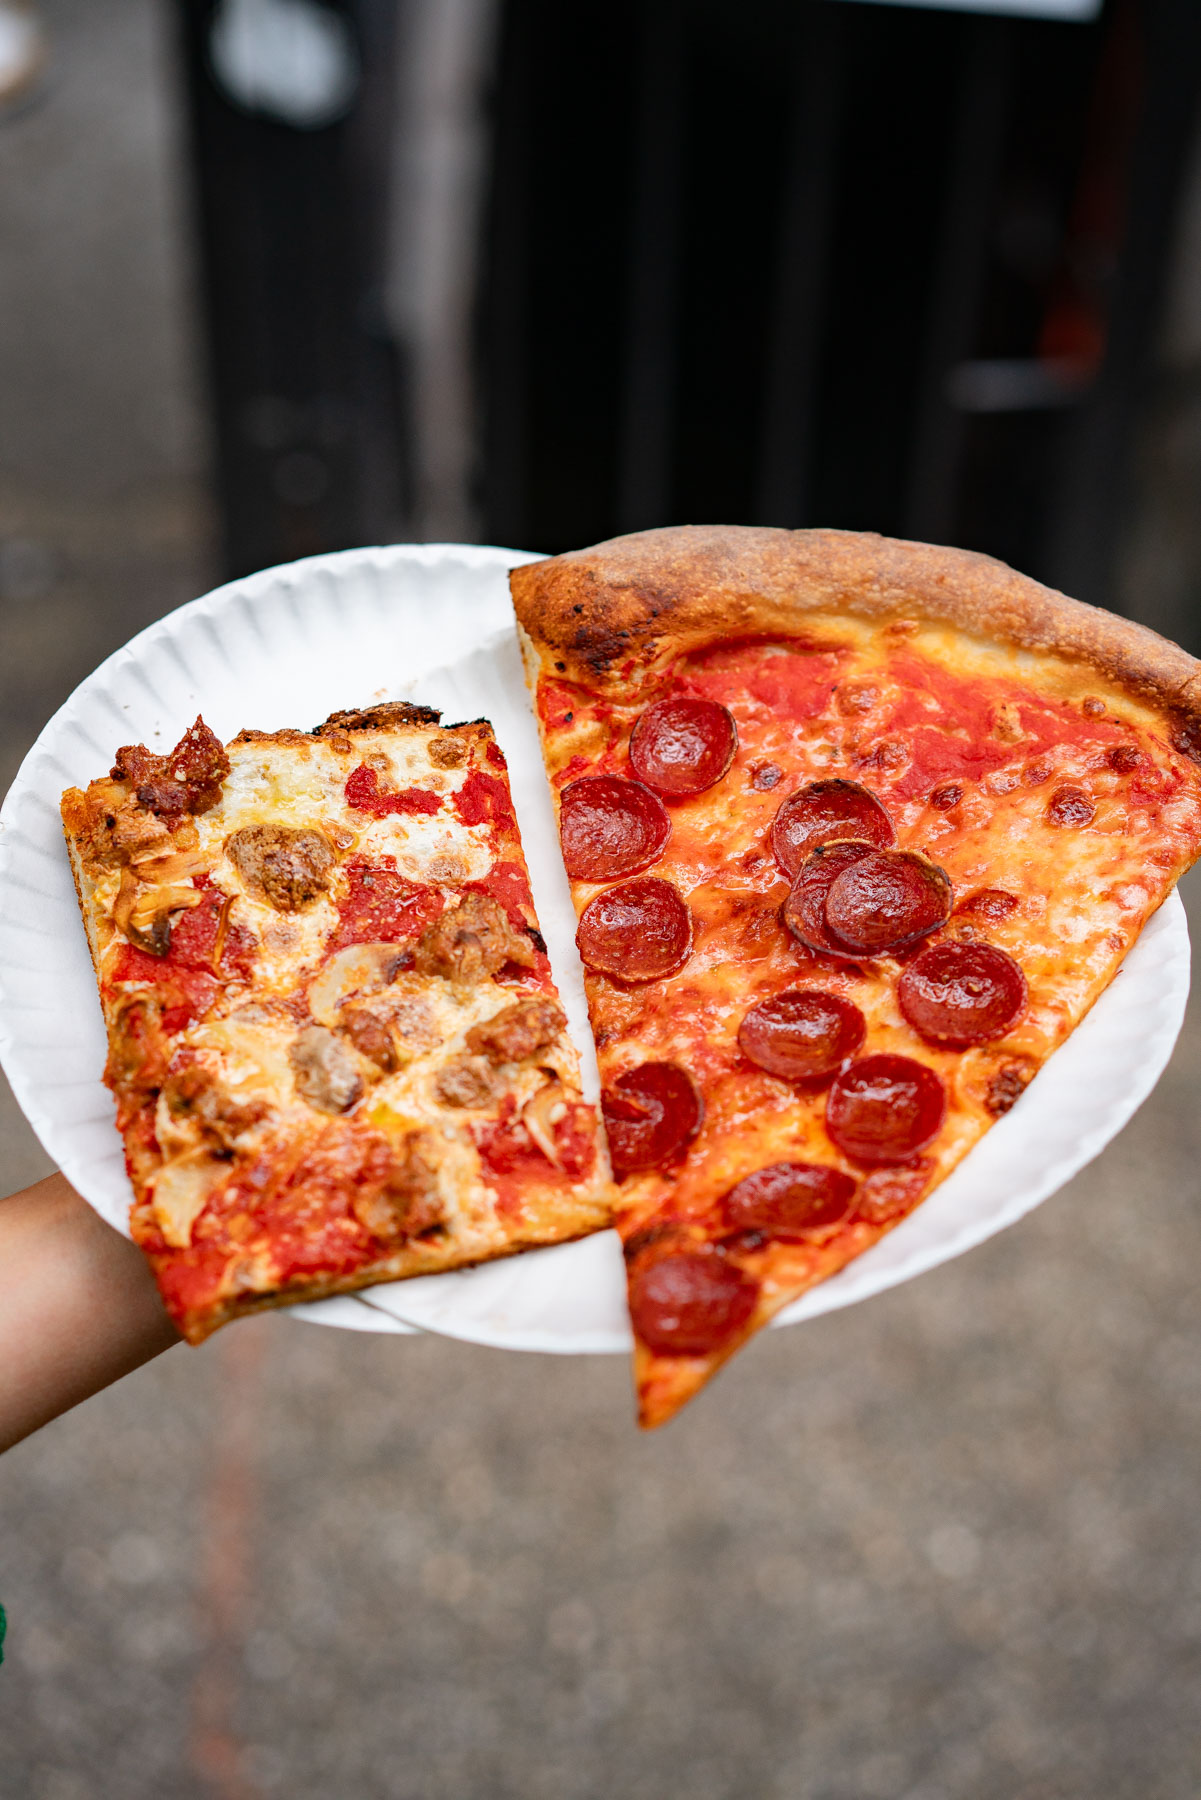 Pepperoni slice and meat lovers slice from Scarr's Pizza Lower East Side